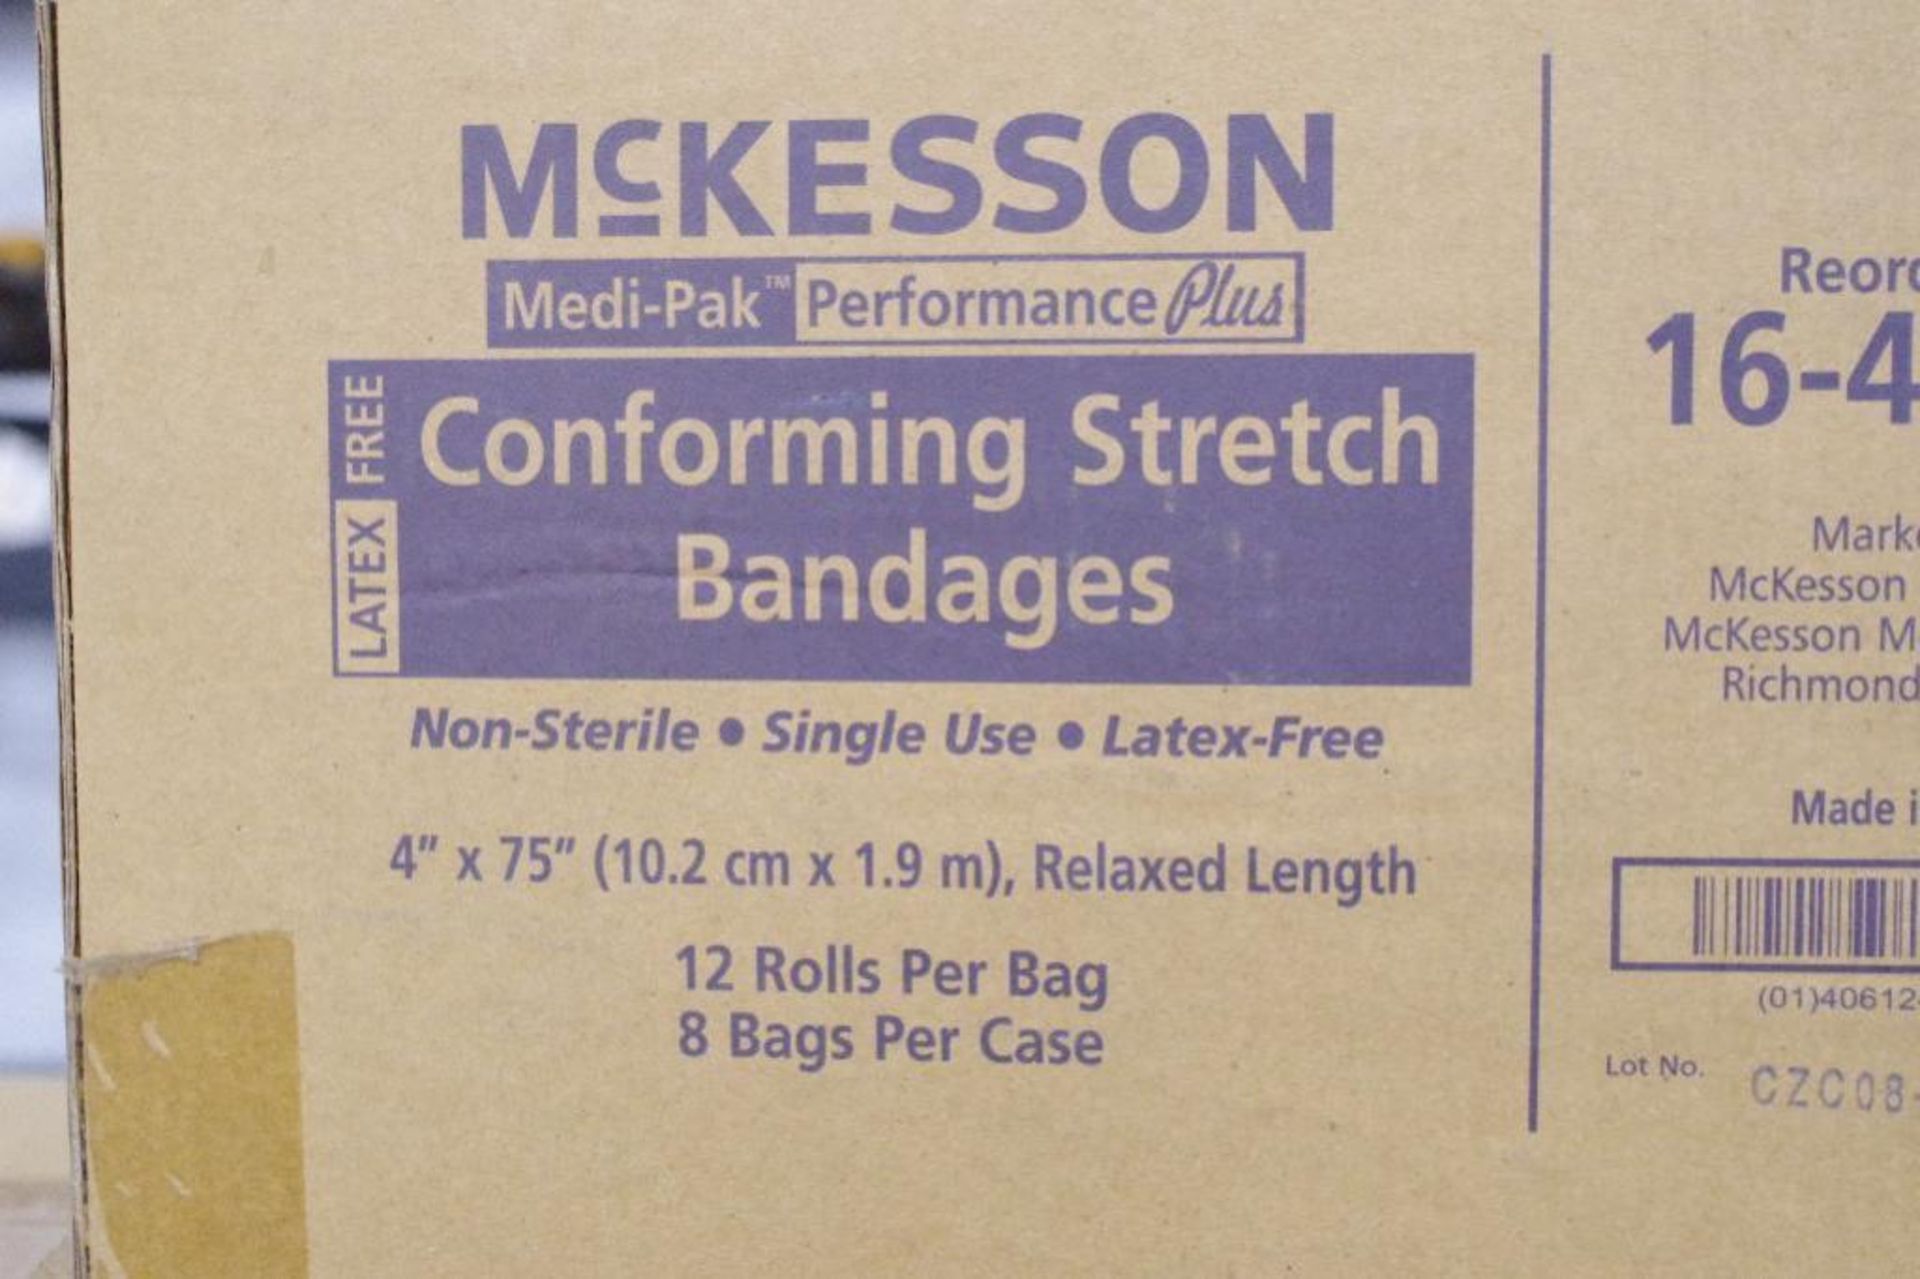 (288) McKESSON Conforming Stretch Bandages, 4" x 75" (3 Cases of 96 Rolls) - Image 2 of 3